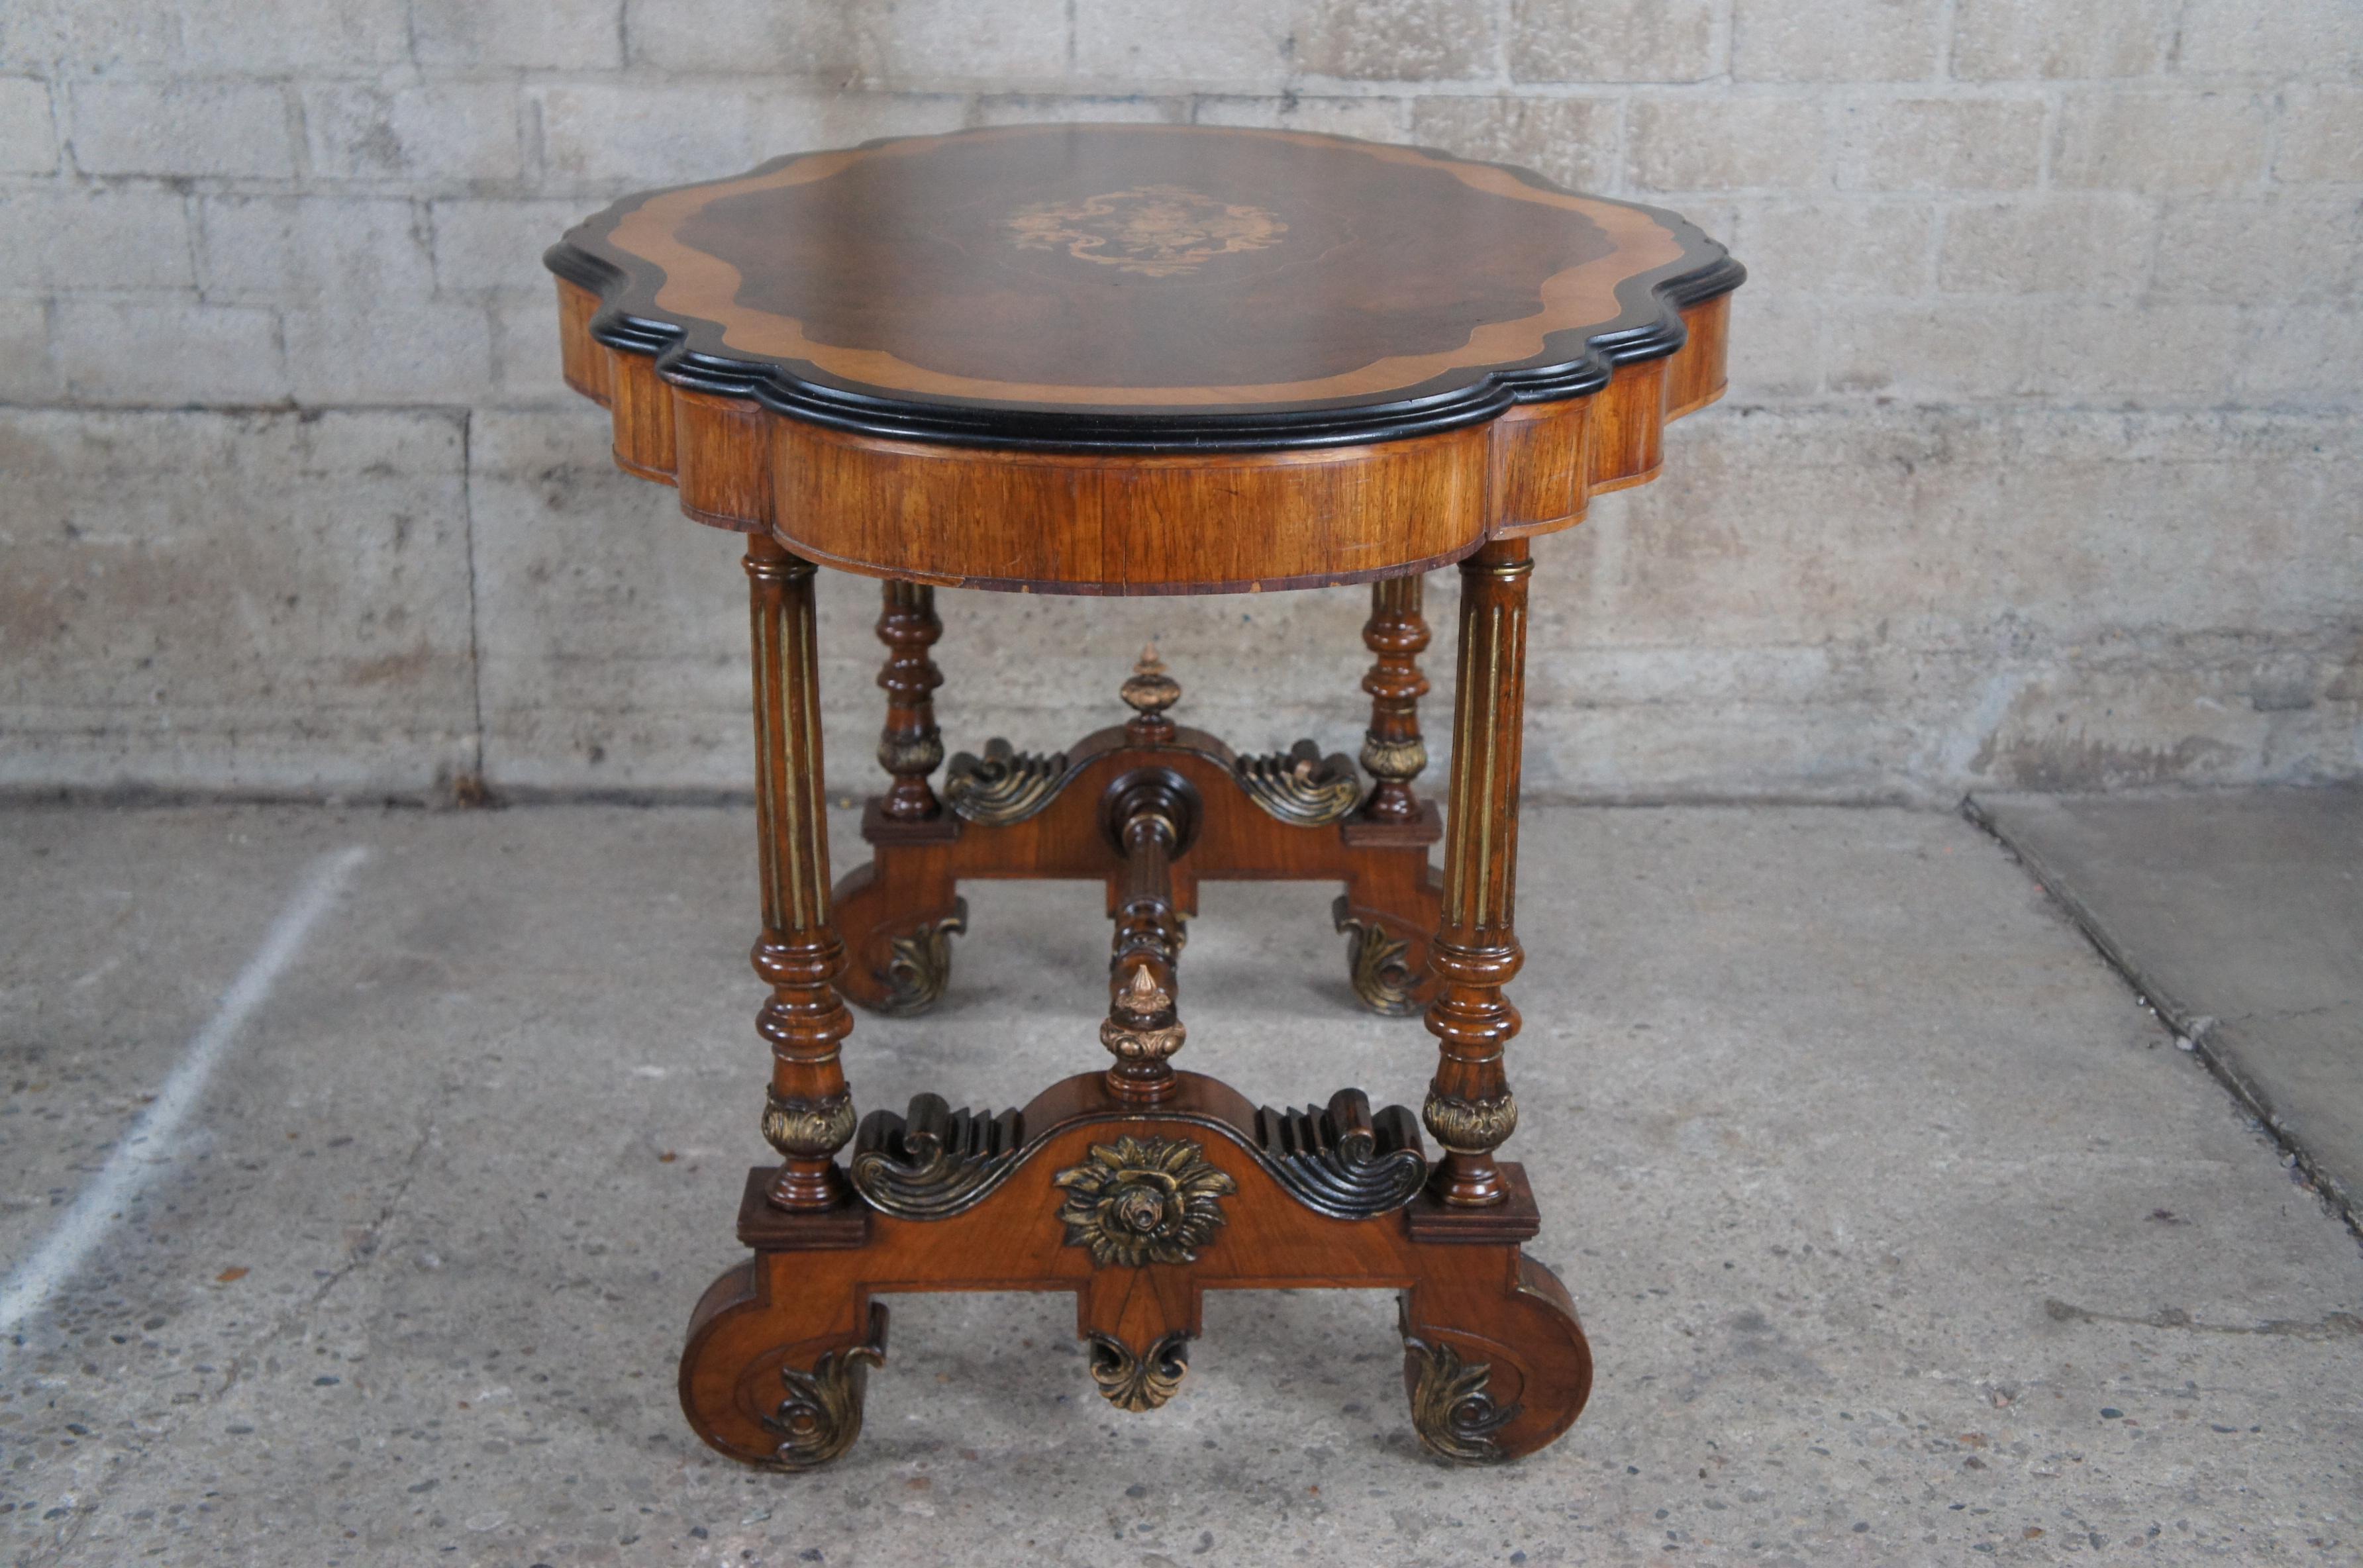 Antique American Renaissance Revival Serpentine Walnut Marquetry Center Table For Sale 4